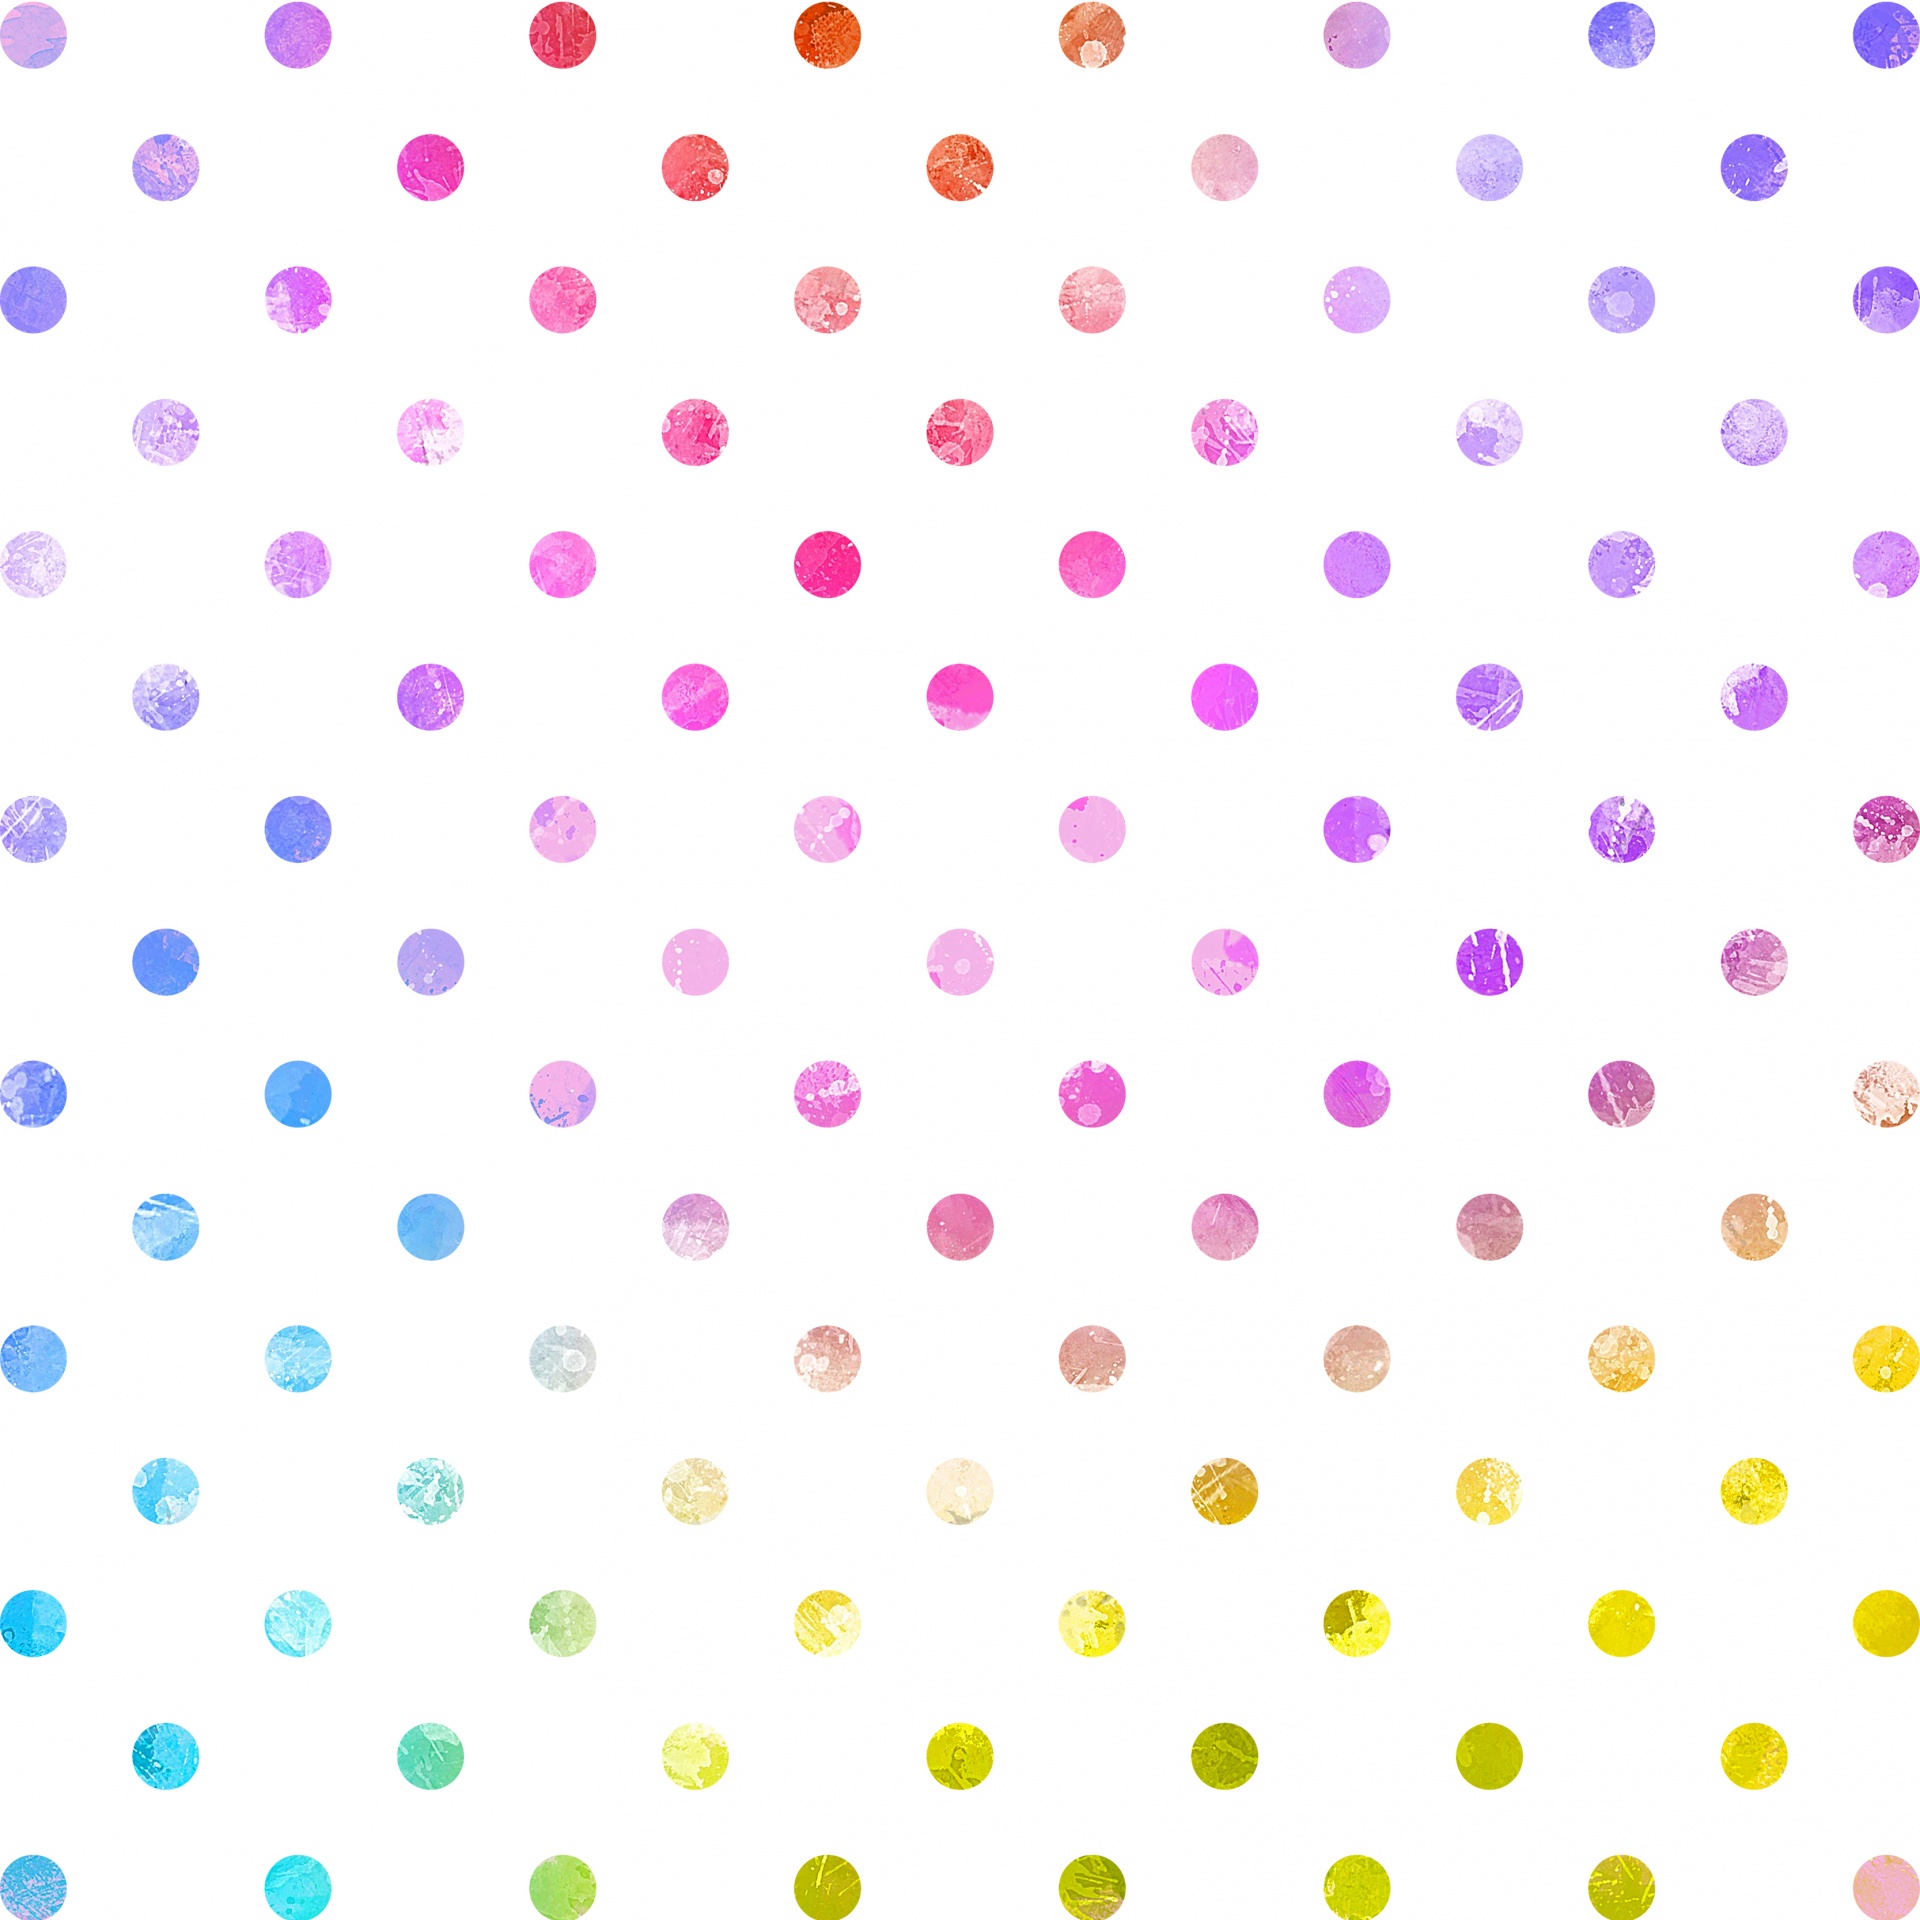 Colorful watercolor polka dots background wallpaper seamless pattern